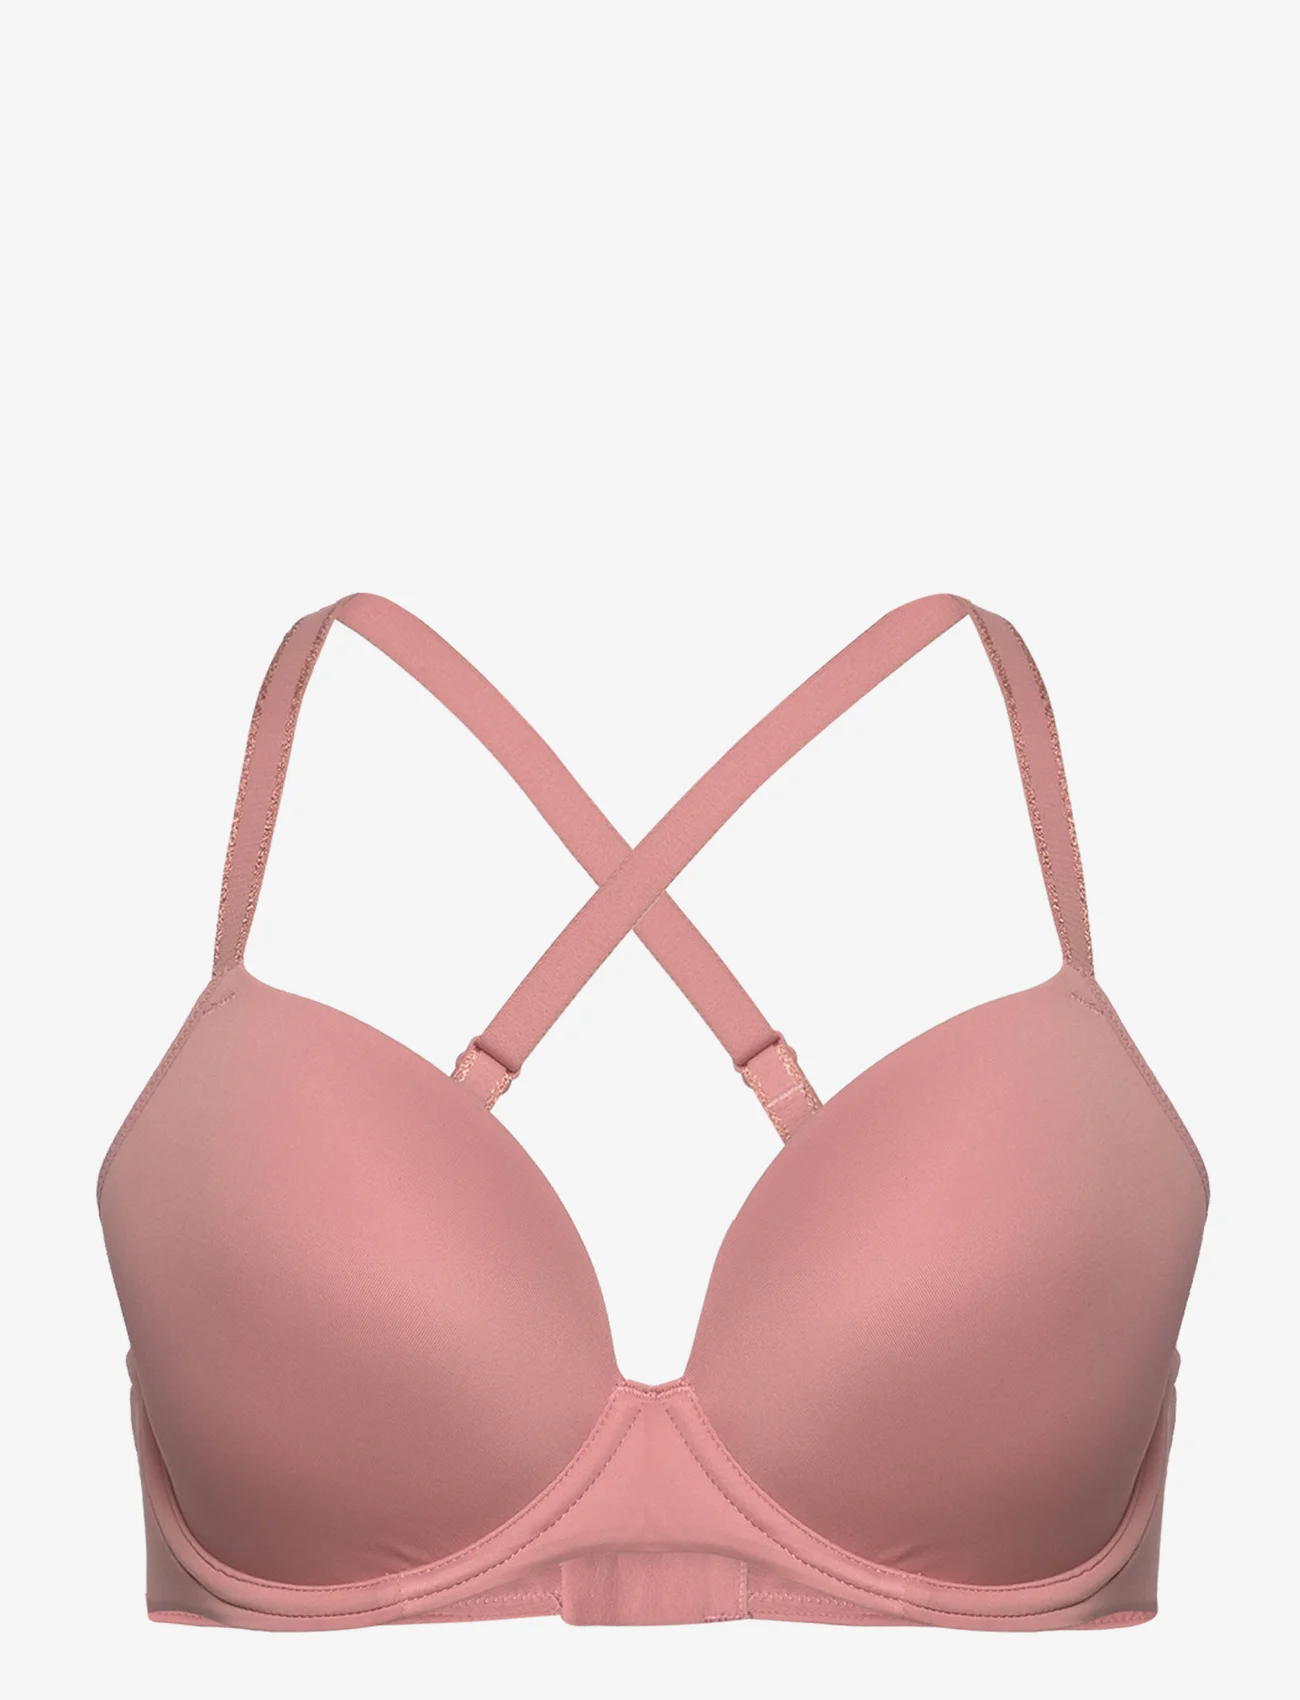 Freya - UNDETECTED UW MOULDED T-SHIRT BRA - full cup bras - ash rose - 0